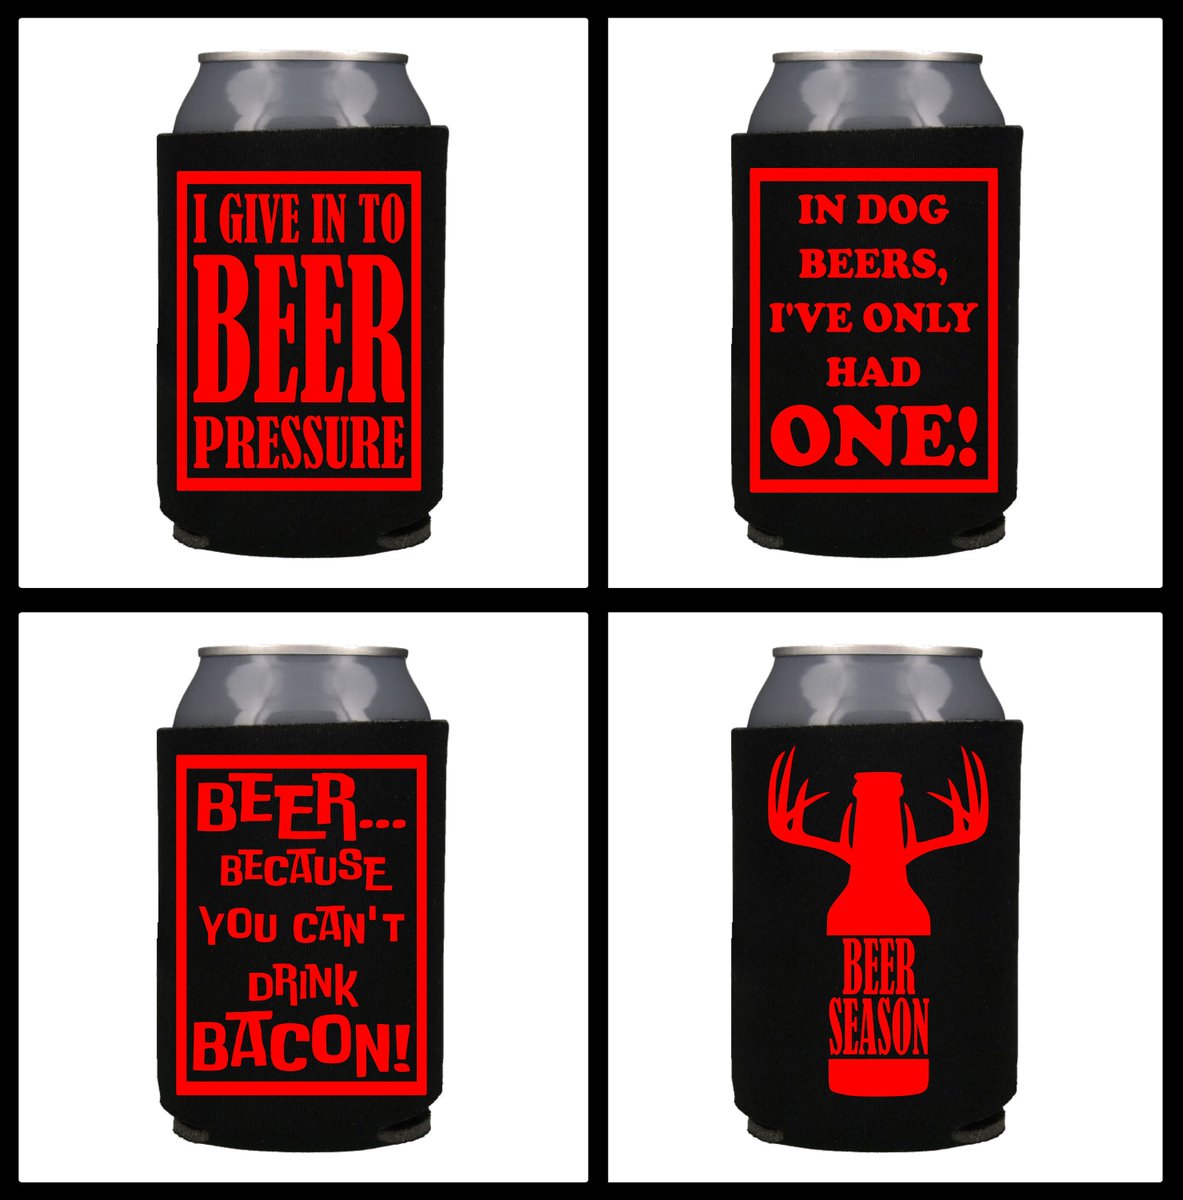 In Dog Beers I've Only Had One, Beer Season, I Give Into Beer Pressure Beer Cause You Can't Drink Bacon Funny Birthday Event Can Coolers etsy.me/2sABM4l #custombirthdayfavors #cankoozies #koozies #cancoolers #canhuggers #souvenir